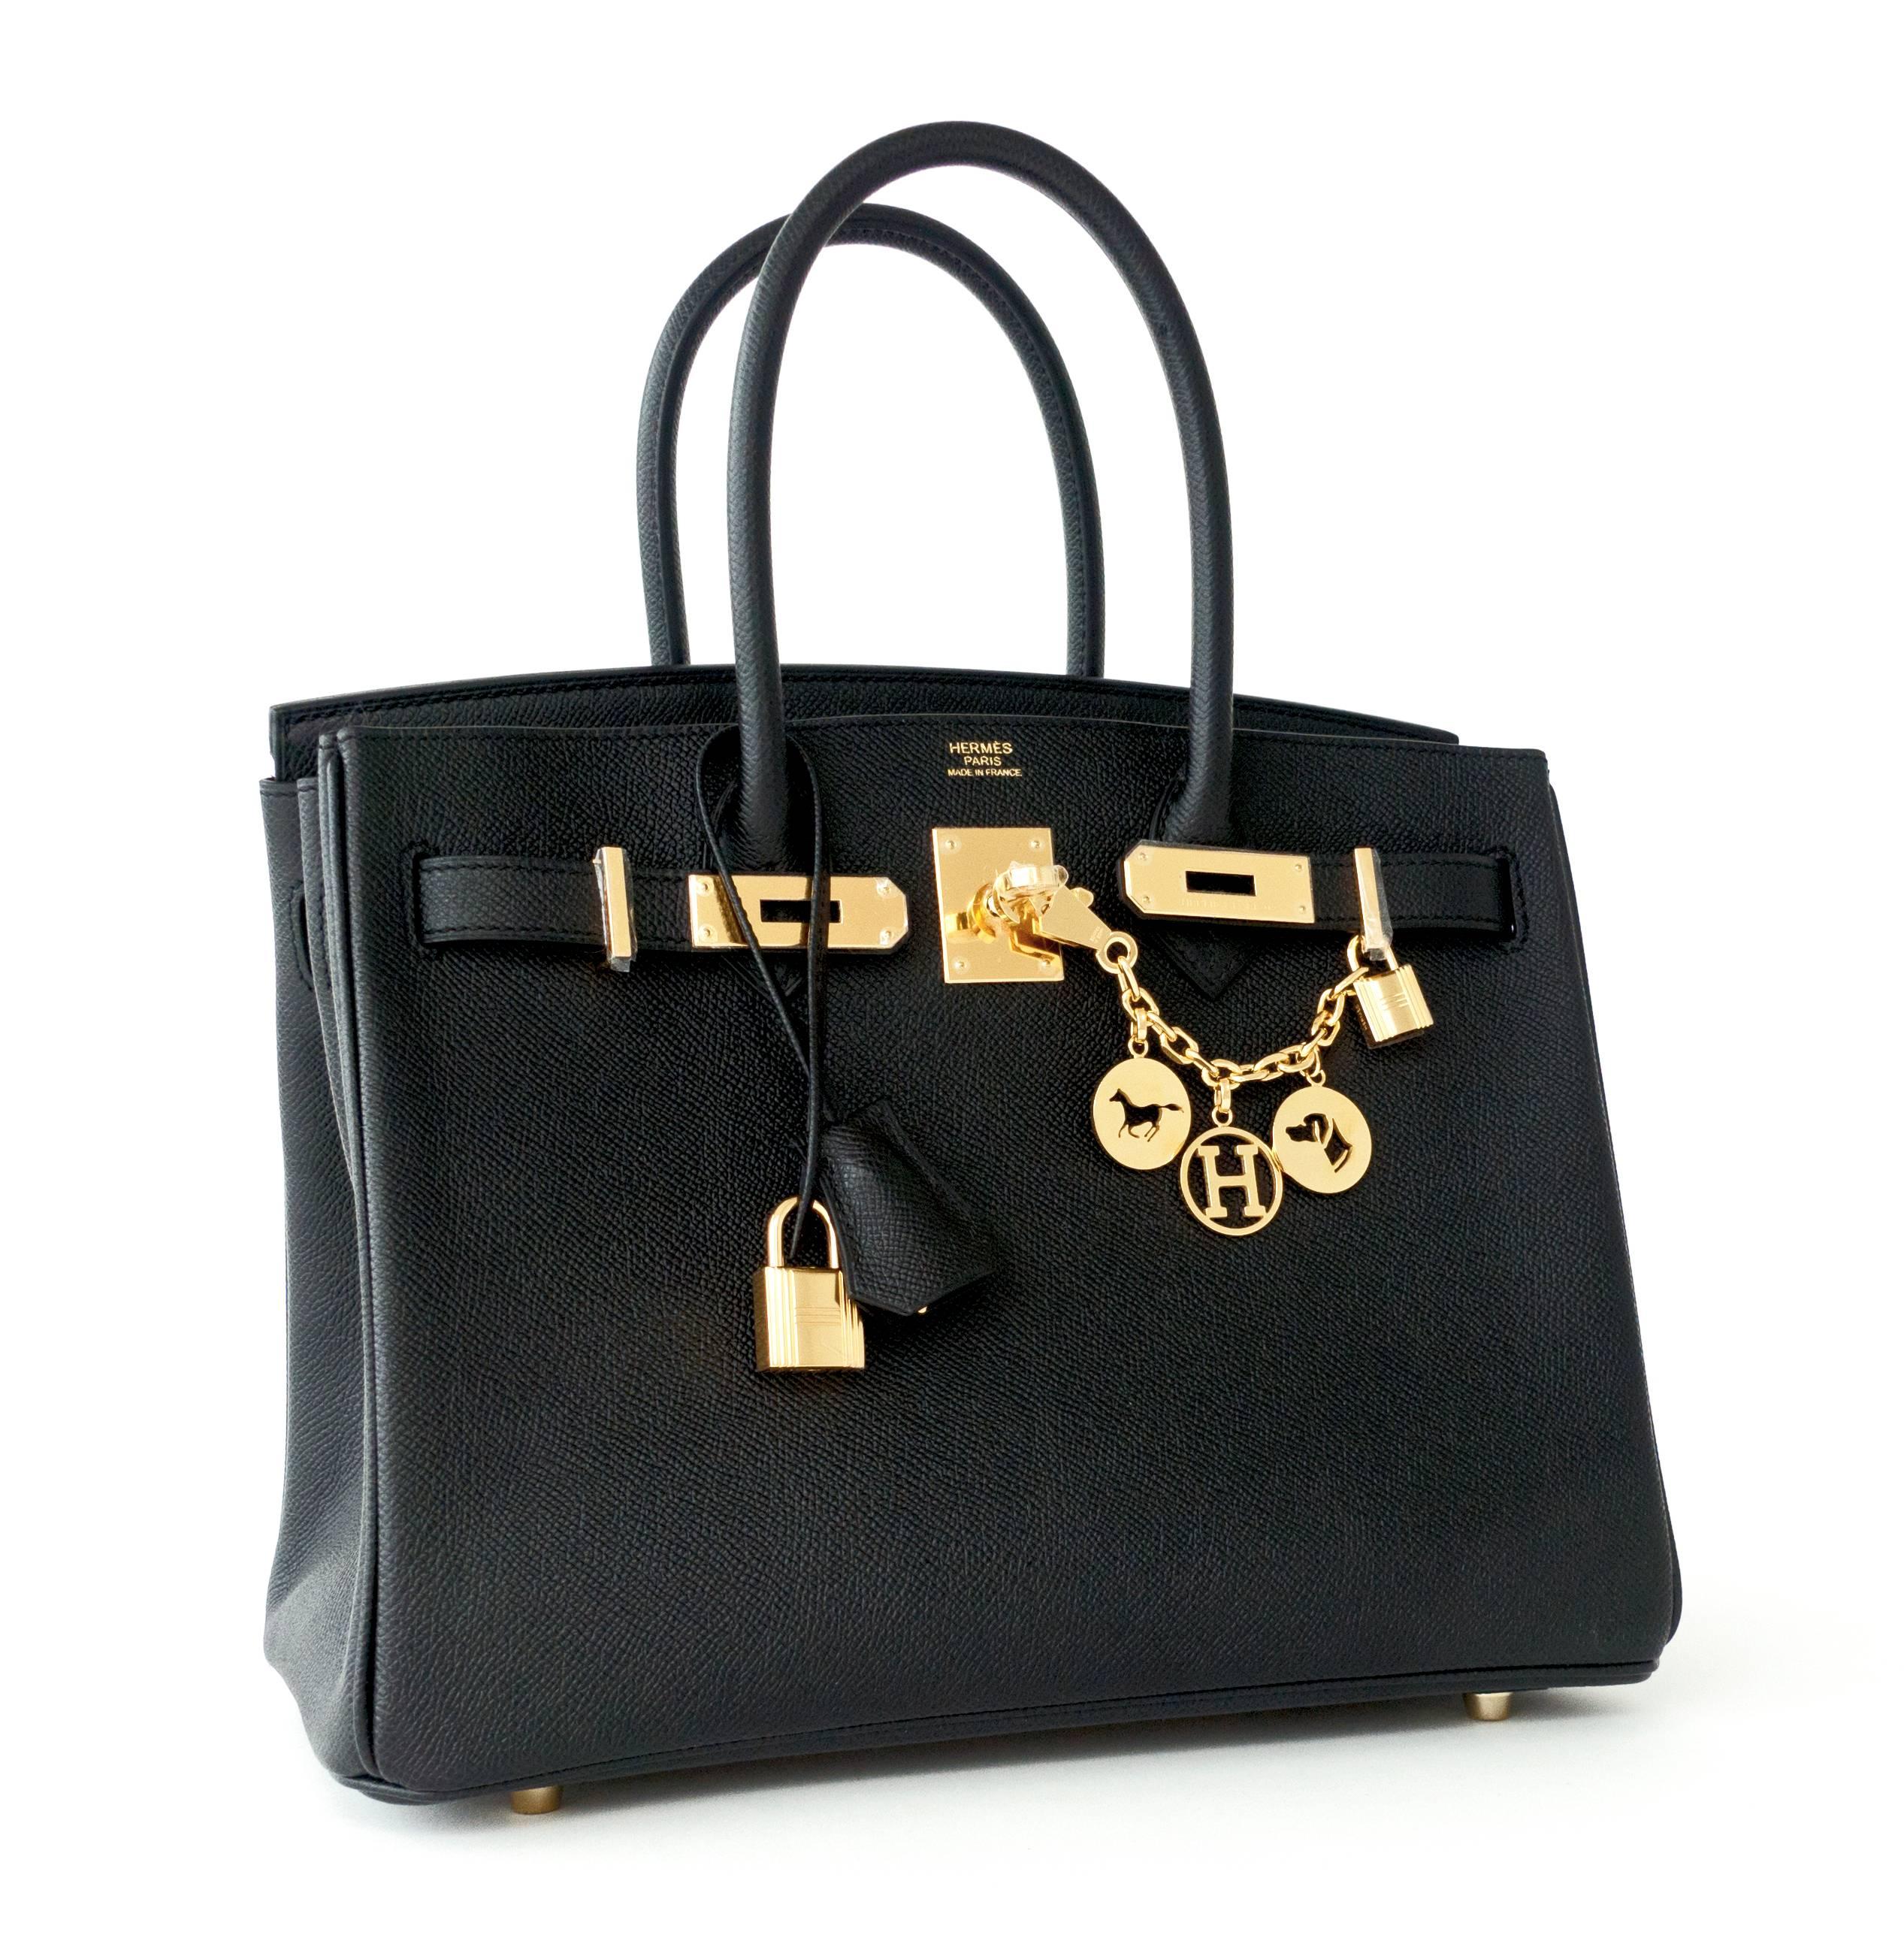 Hermes Black 30cm Birkin Epsom Gold Hardware GHW Satchel Bag Sophisticated
Just purchased from Hermes store; bag bears new interior 2018 stamp.
Store fresh.  Pristine Condition (with plastic on hardware)
Comes with keys, lock, clochette, a sleeper